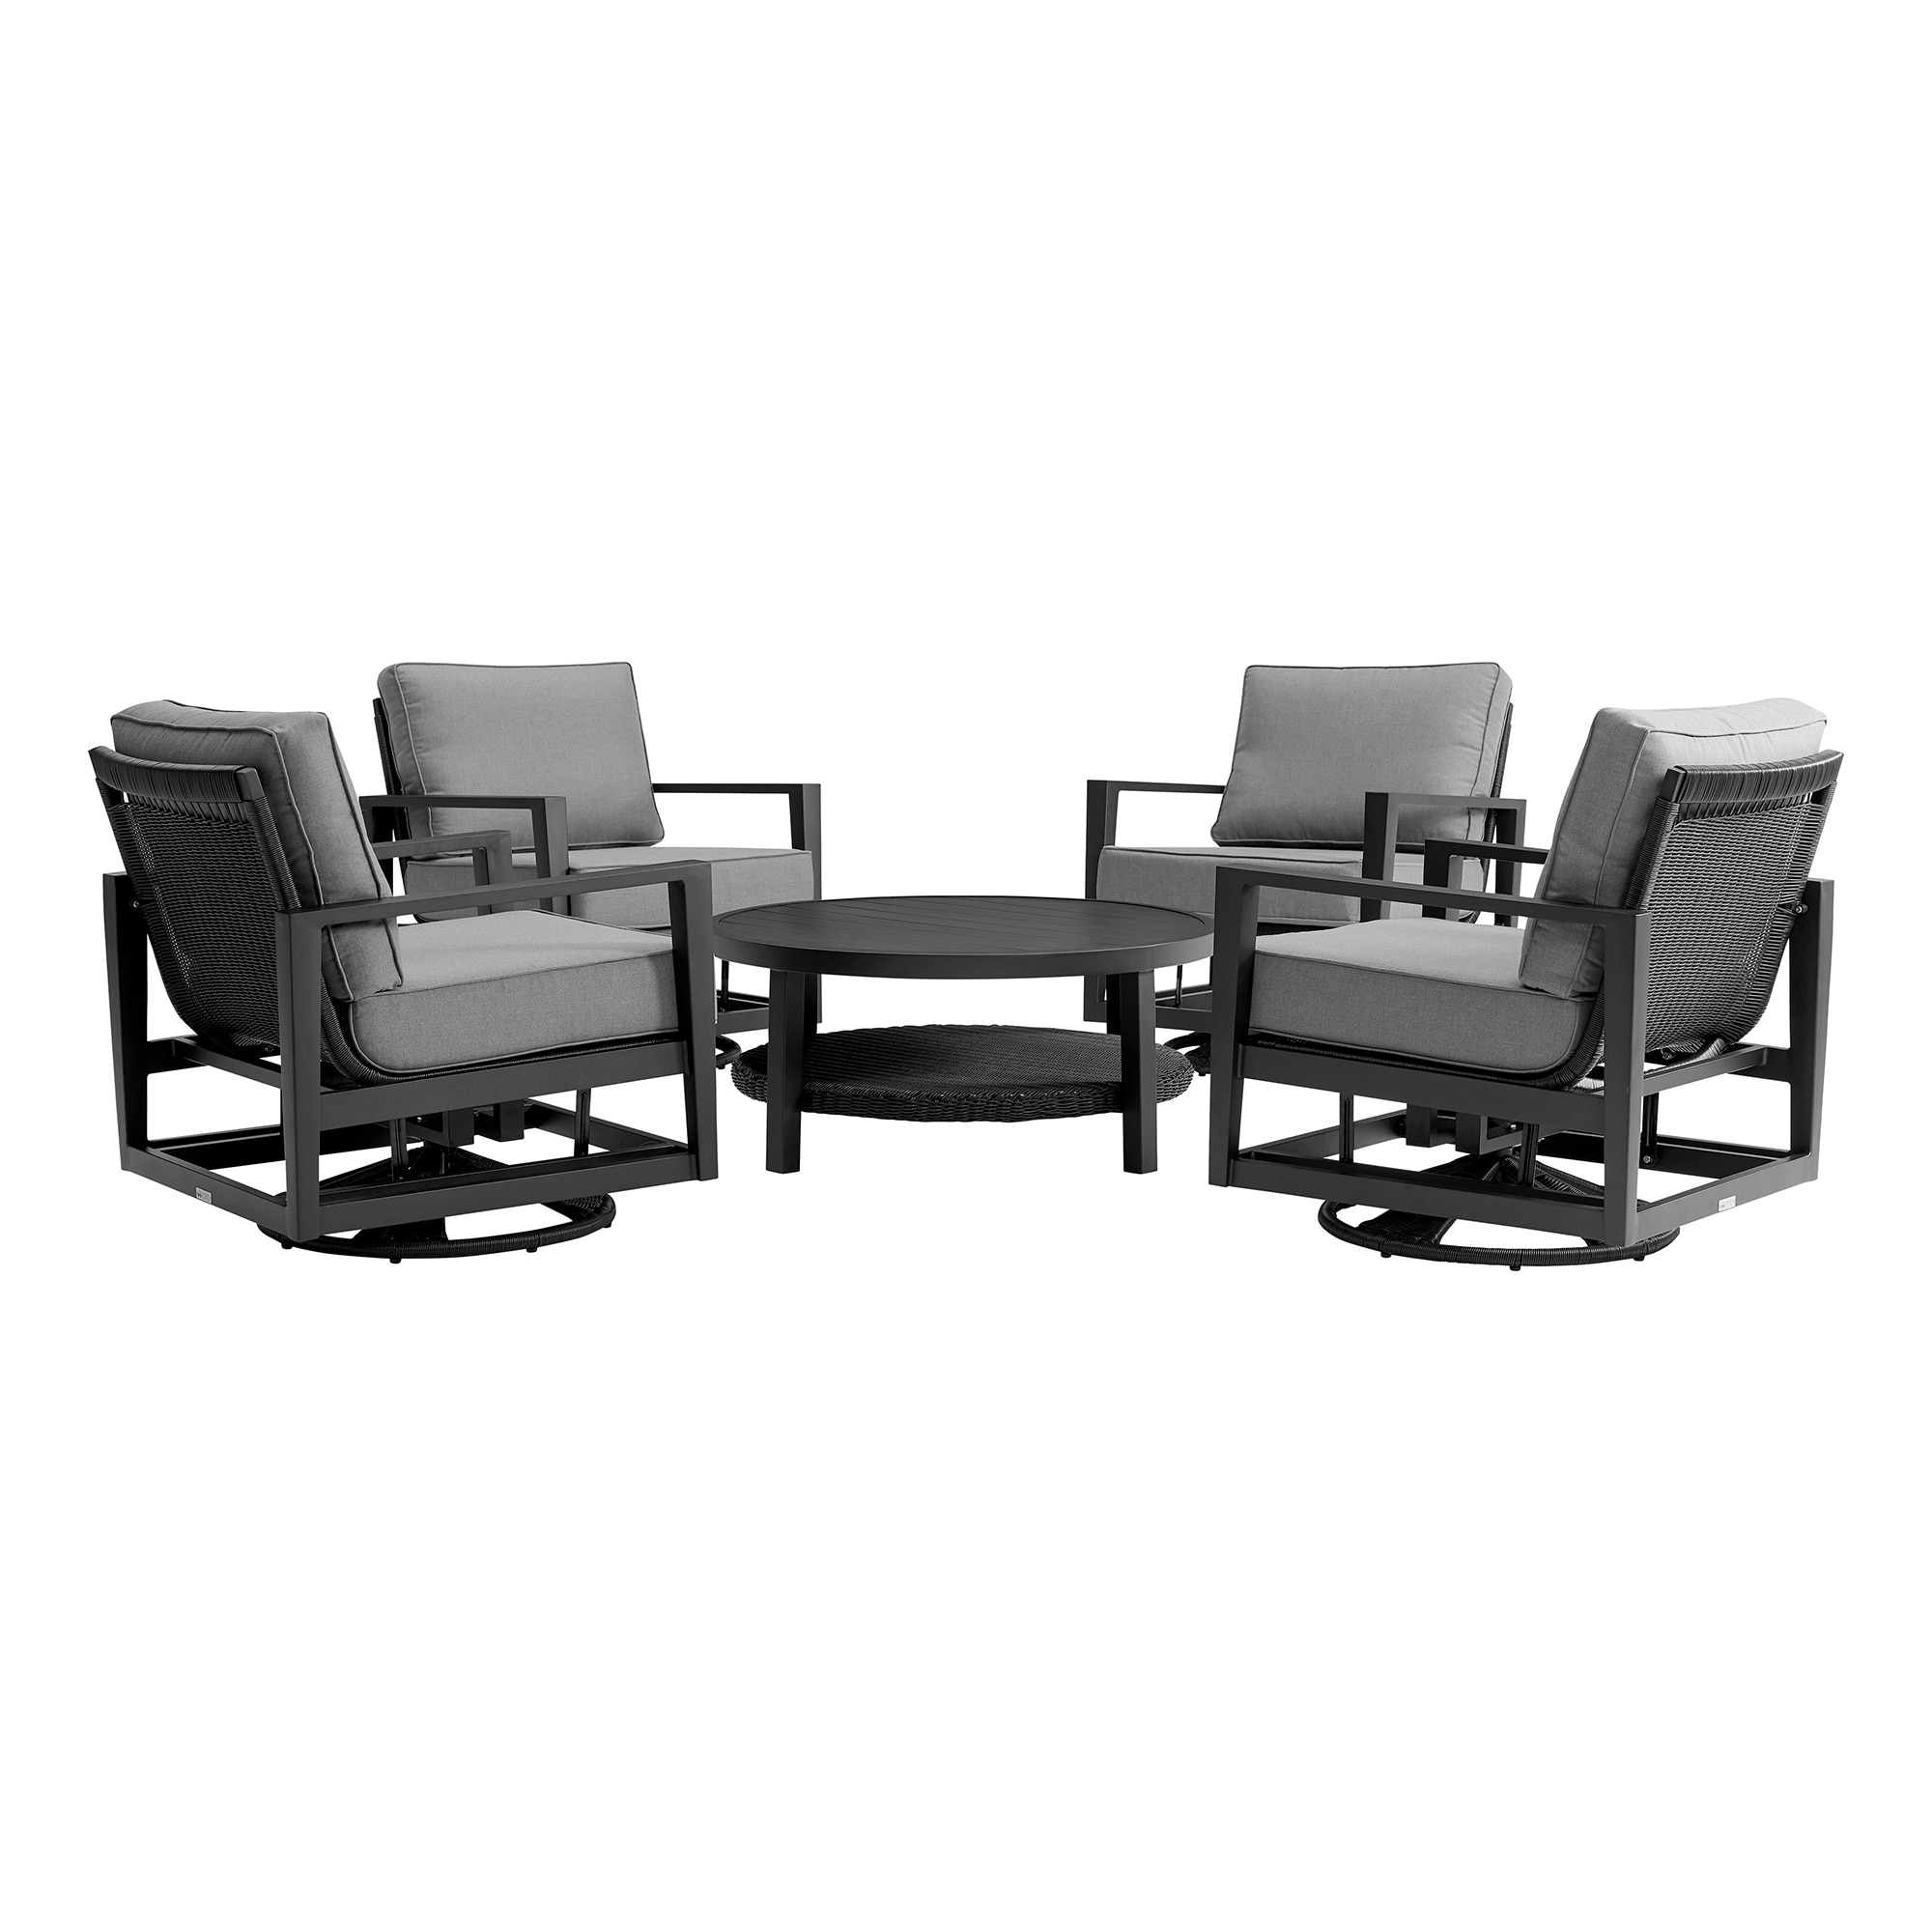 Grand 5 Piece Black Aluminum Outdoor Seating Set with Cushions in Dark Gray